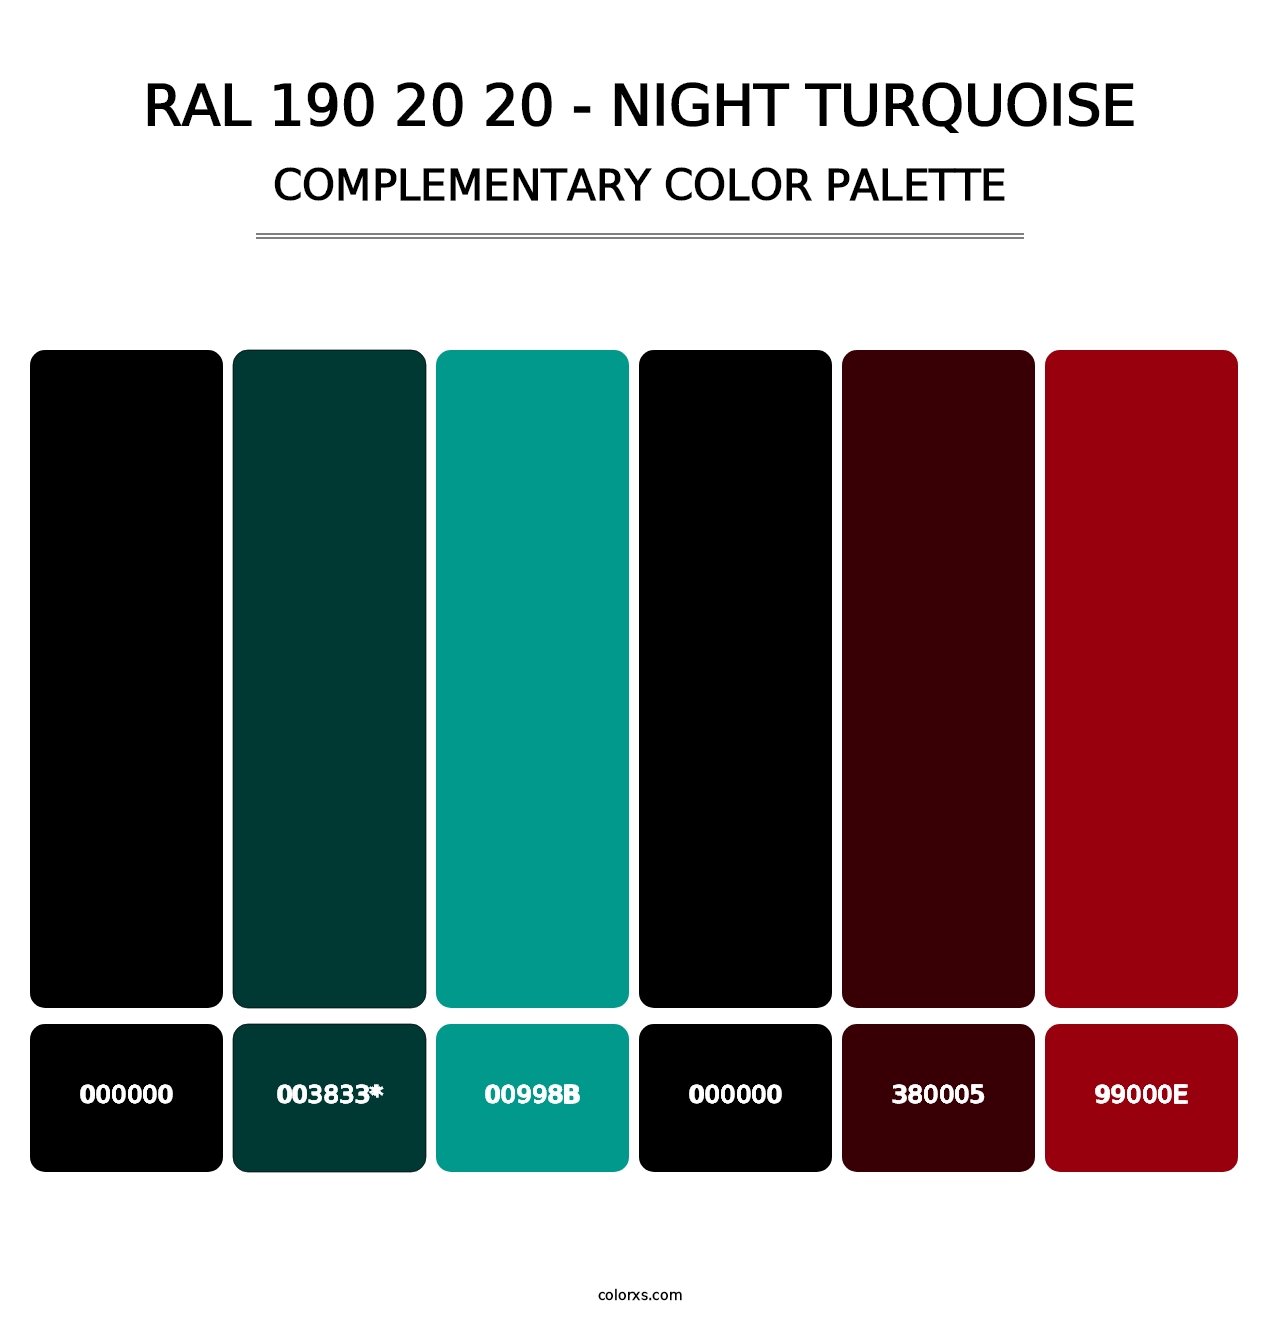 RAL 190 20 20 - Night Turquoise - Complementary Color Palette